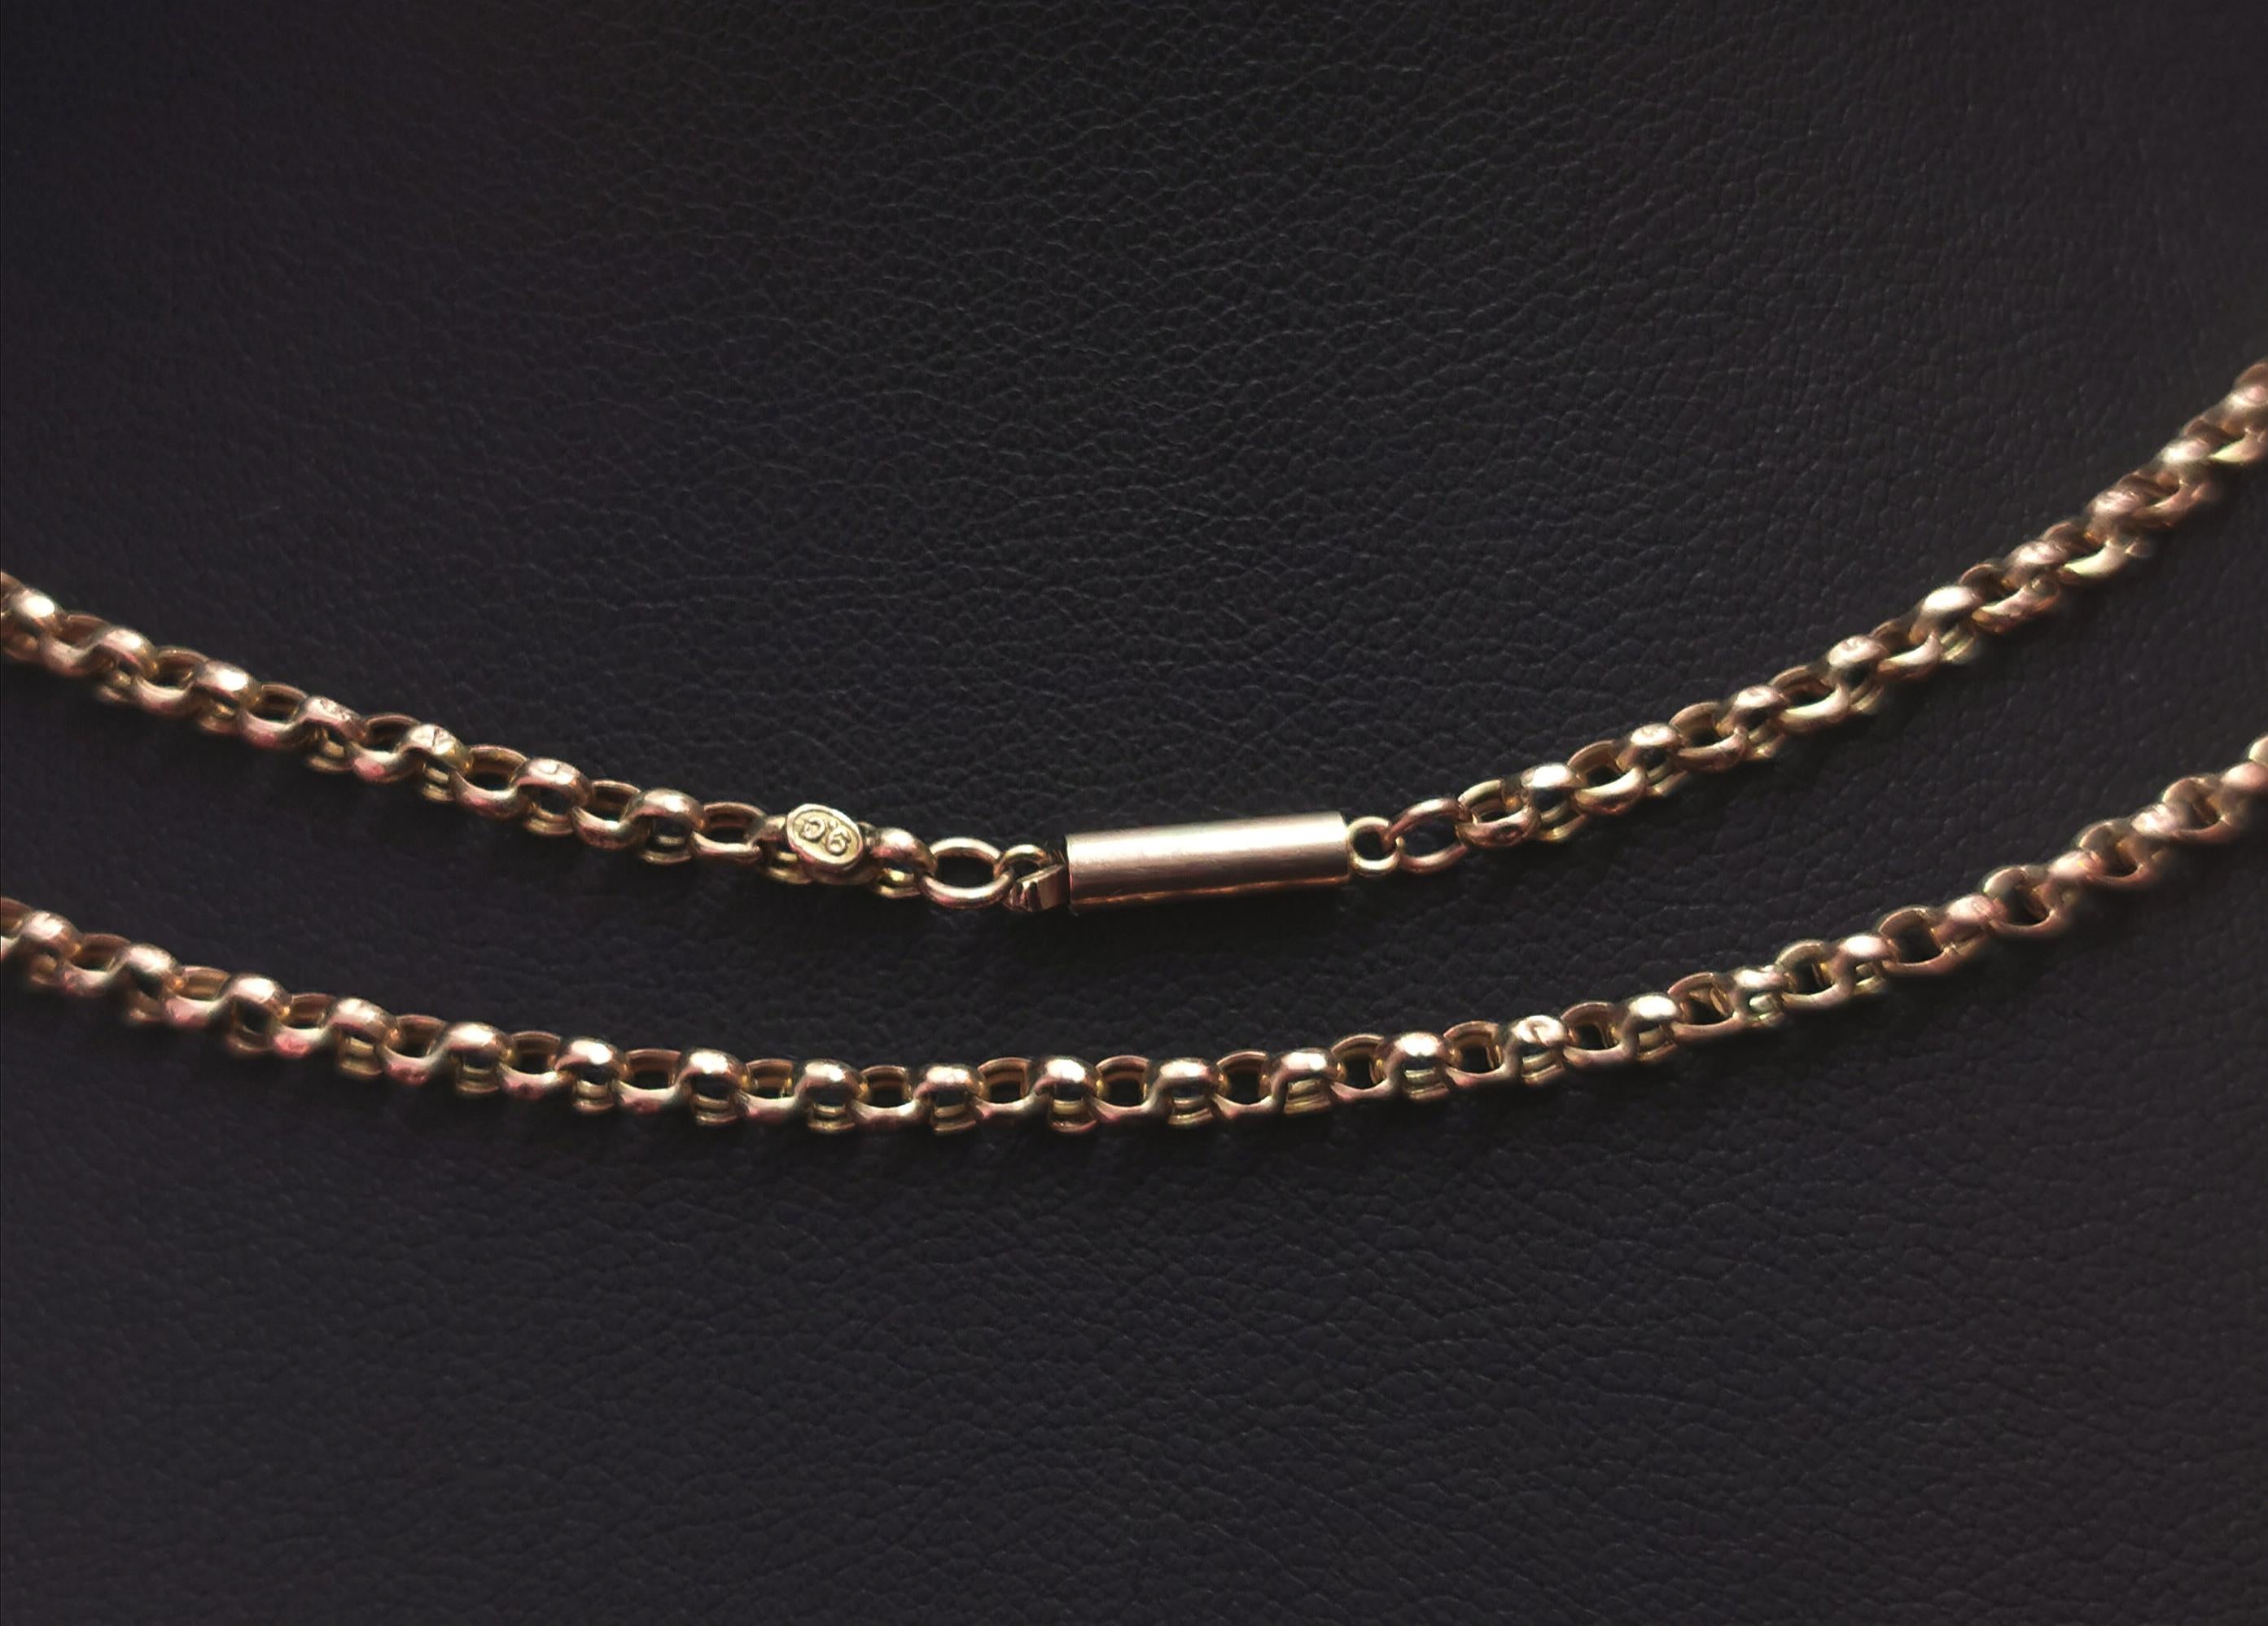 Antique 9k yellow gold rolo link chain necklace, Edwardian era  2